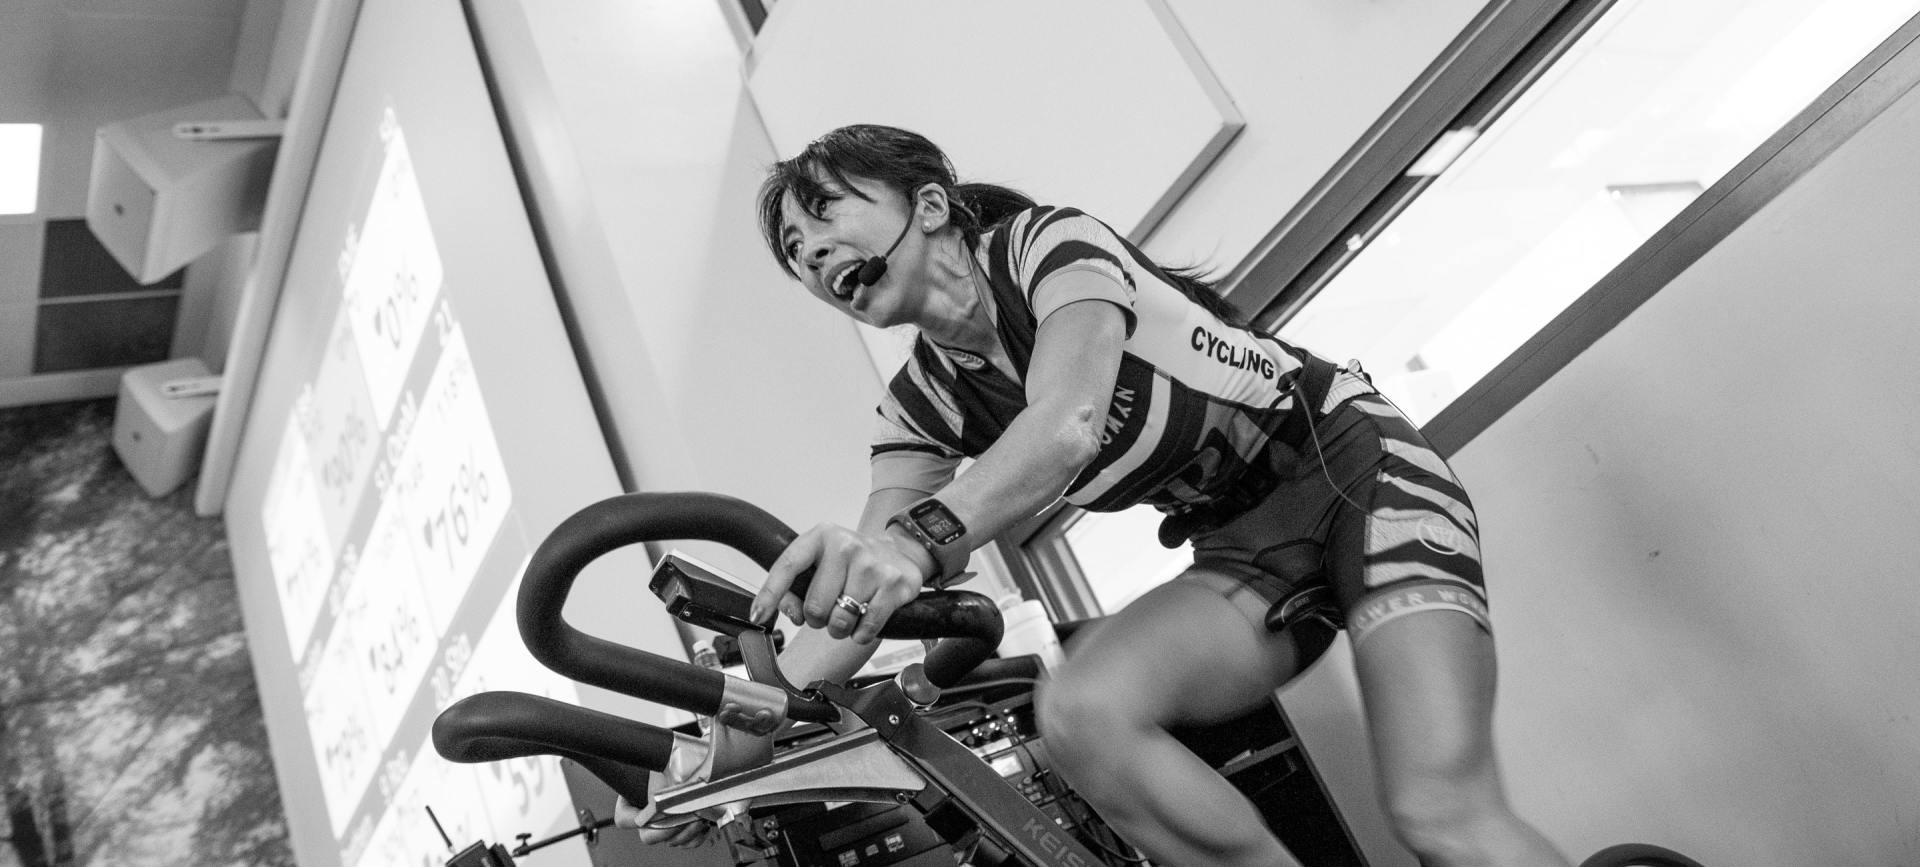 A woman is riding an exercise bike in a black and white photo.